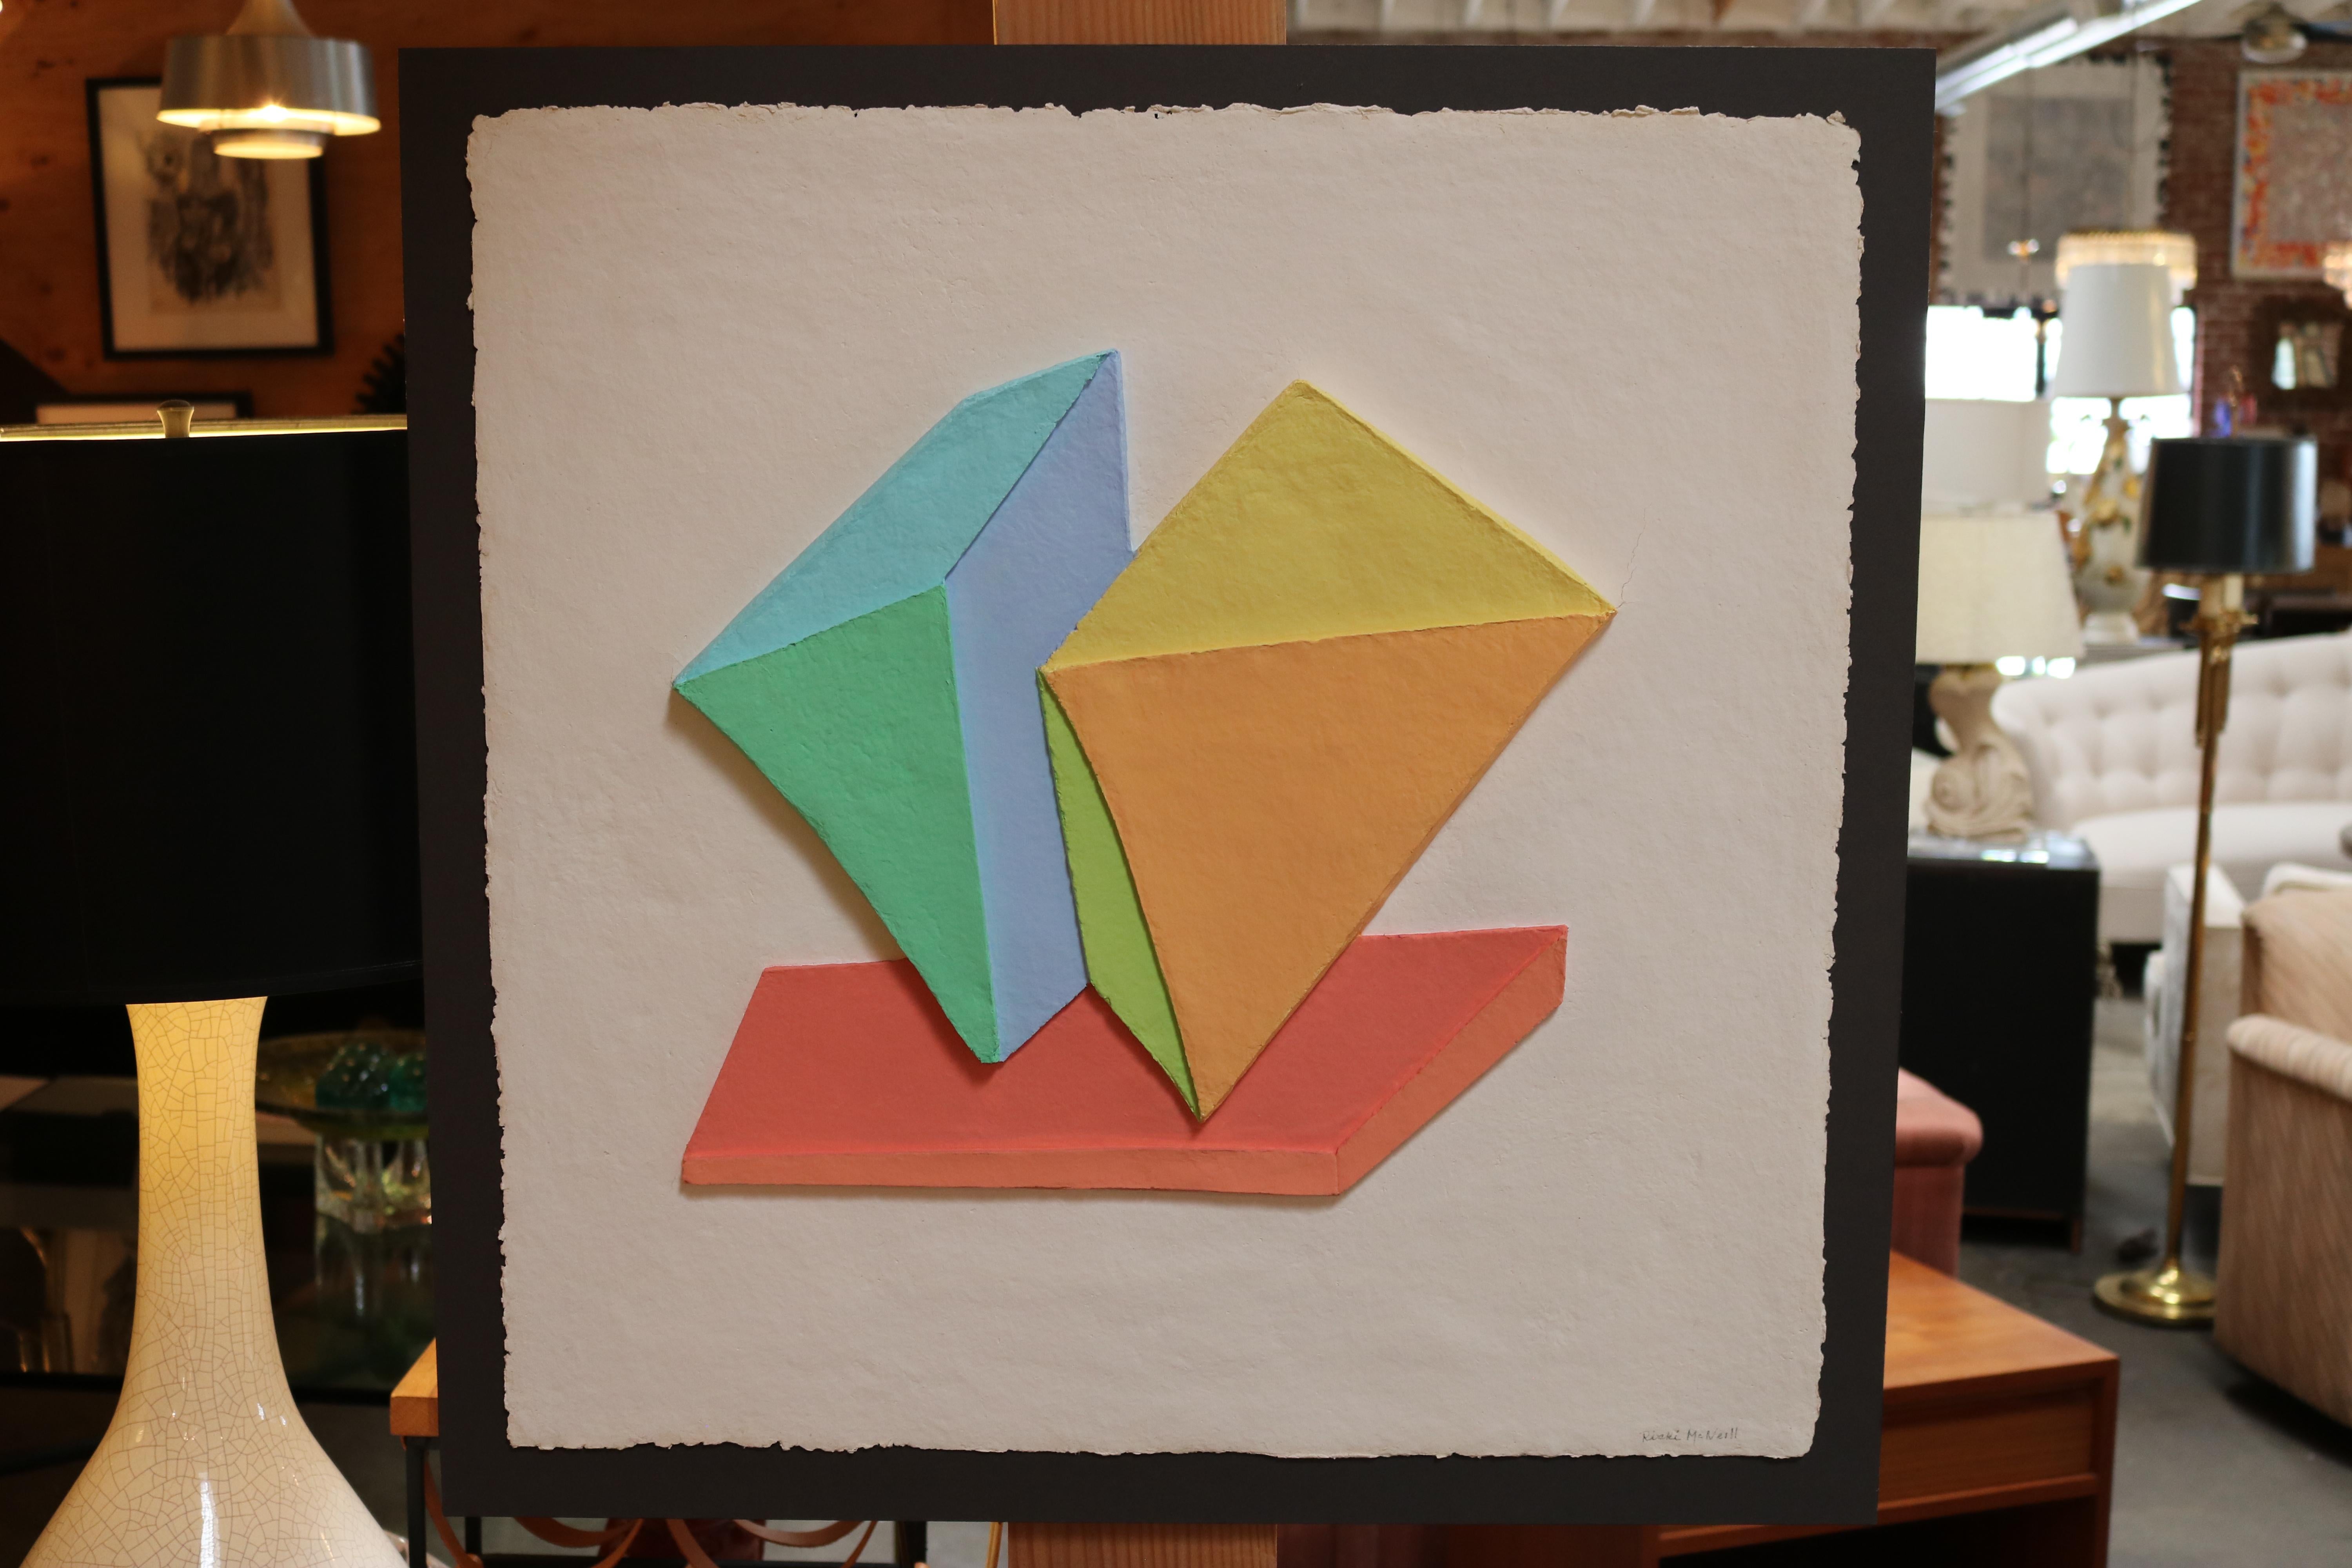 Paper Emboss Geometric 3D Collage Painting by Ricki McNeill